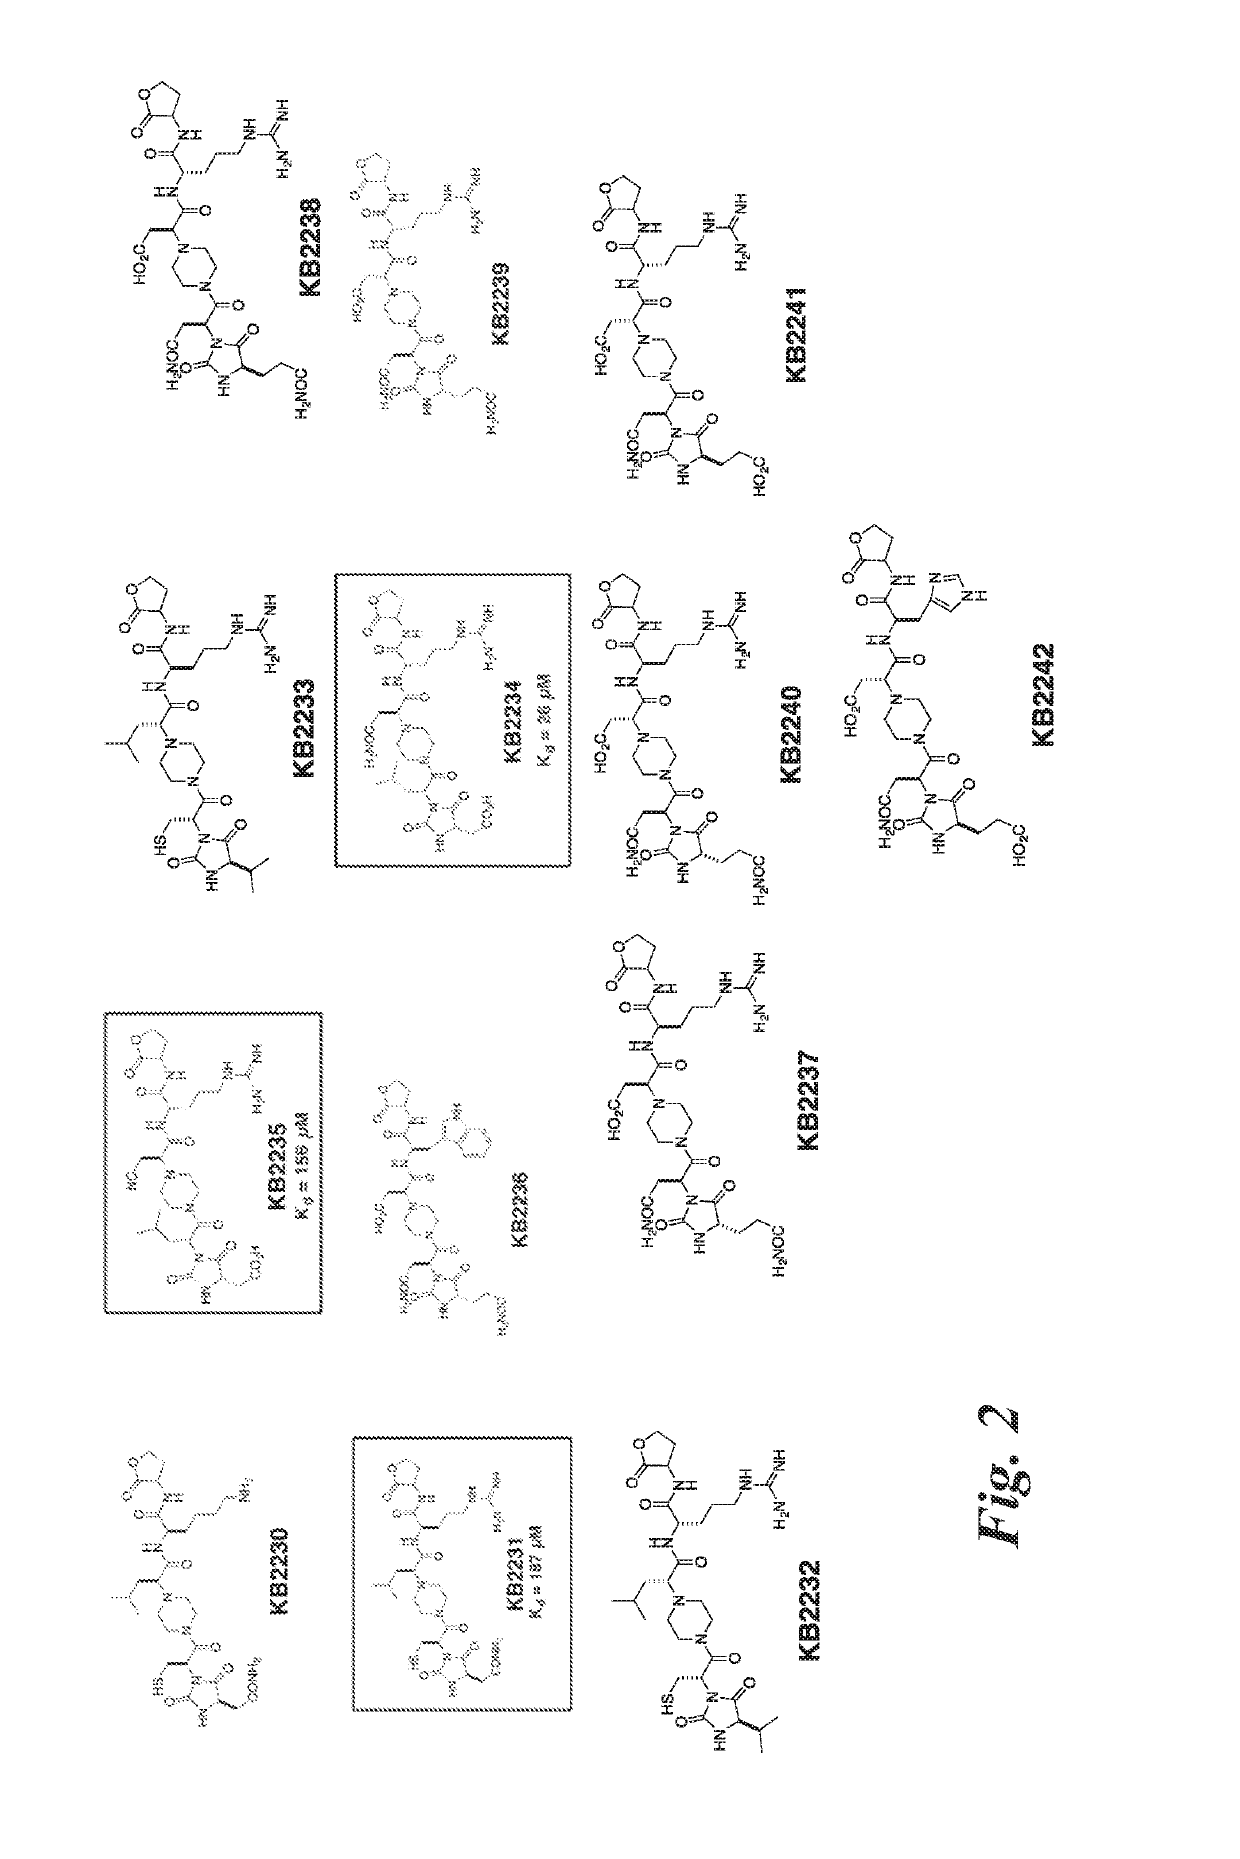 Inhibitors of ldlr-pcsk9 protein-protein interaction and methods of their use